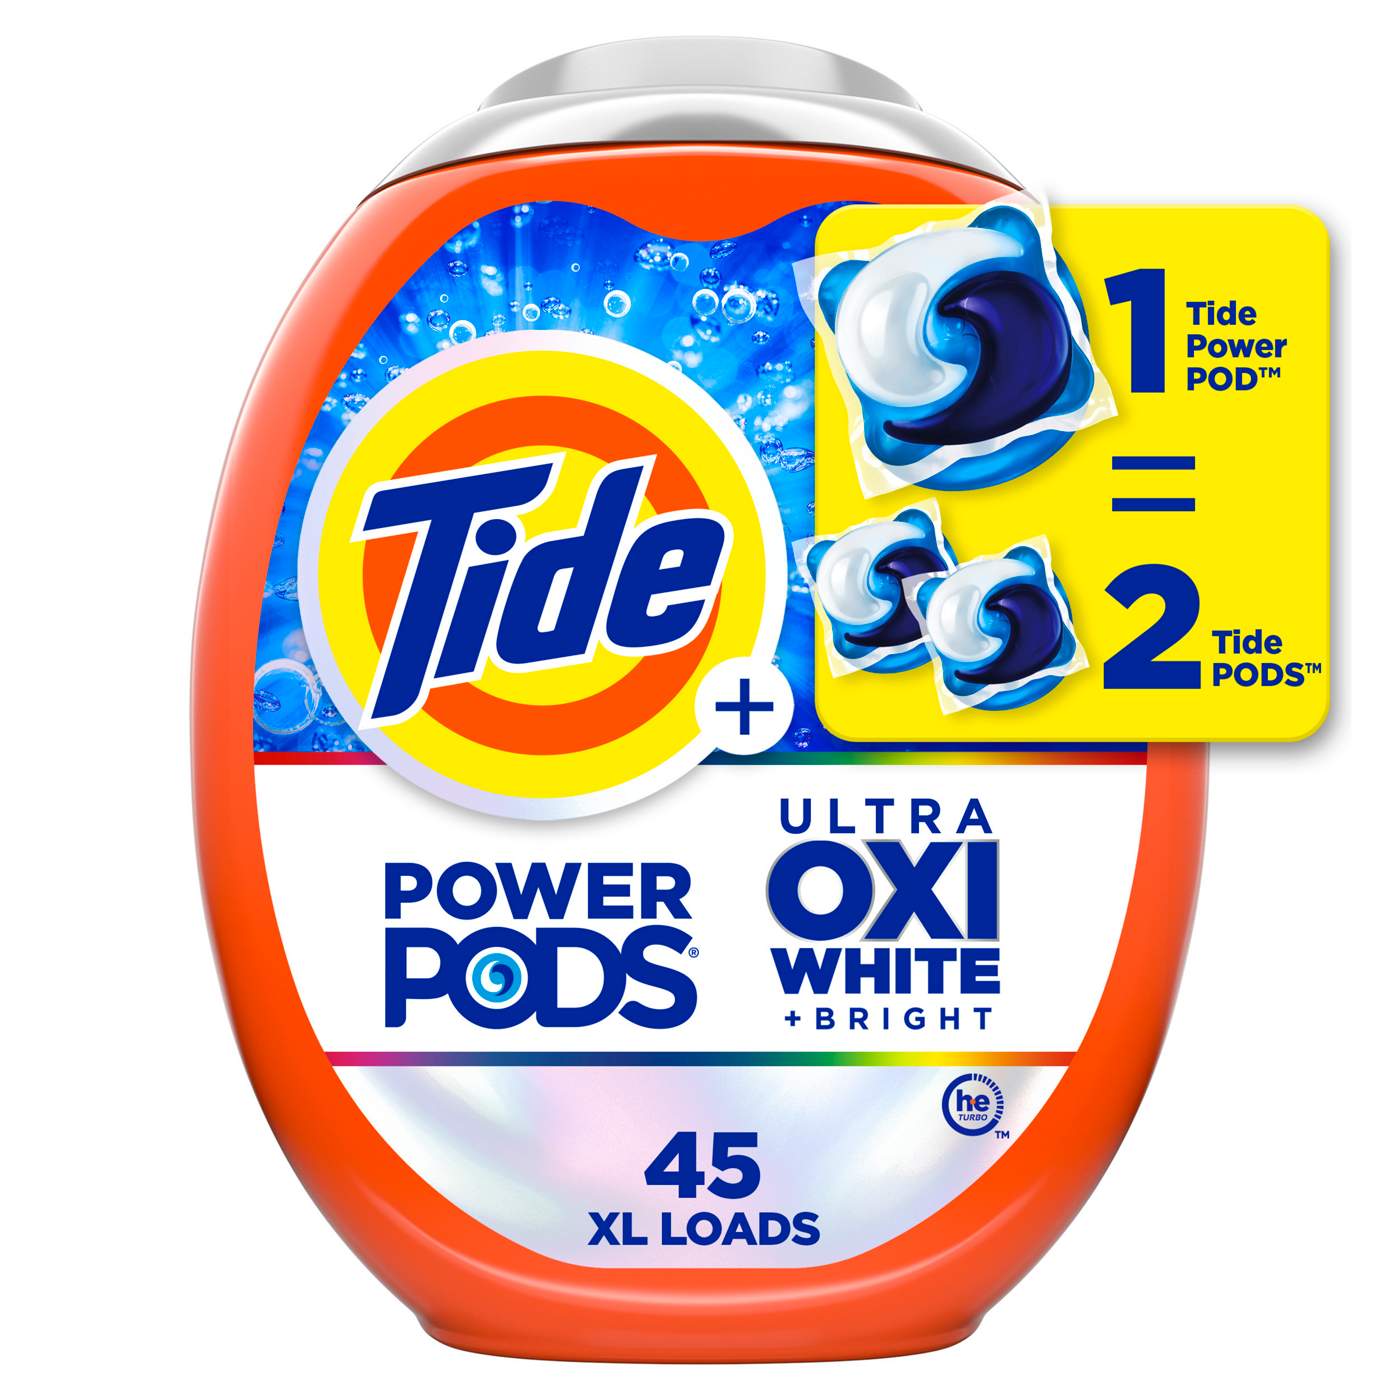 Tide Power Pods + Ultra Oxi White & Bright HE Laundry Detergent; image 1 of 8